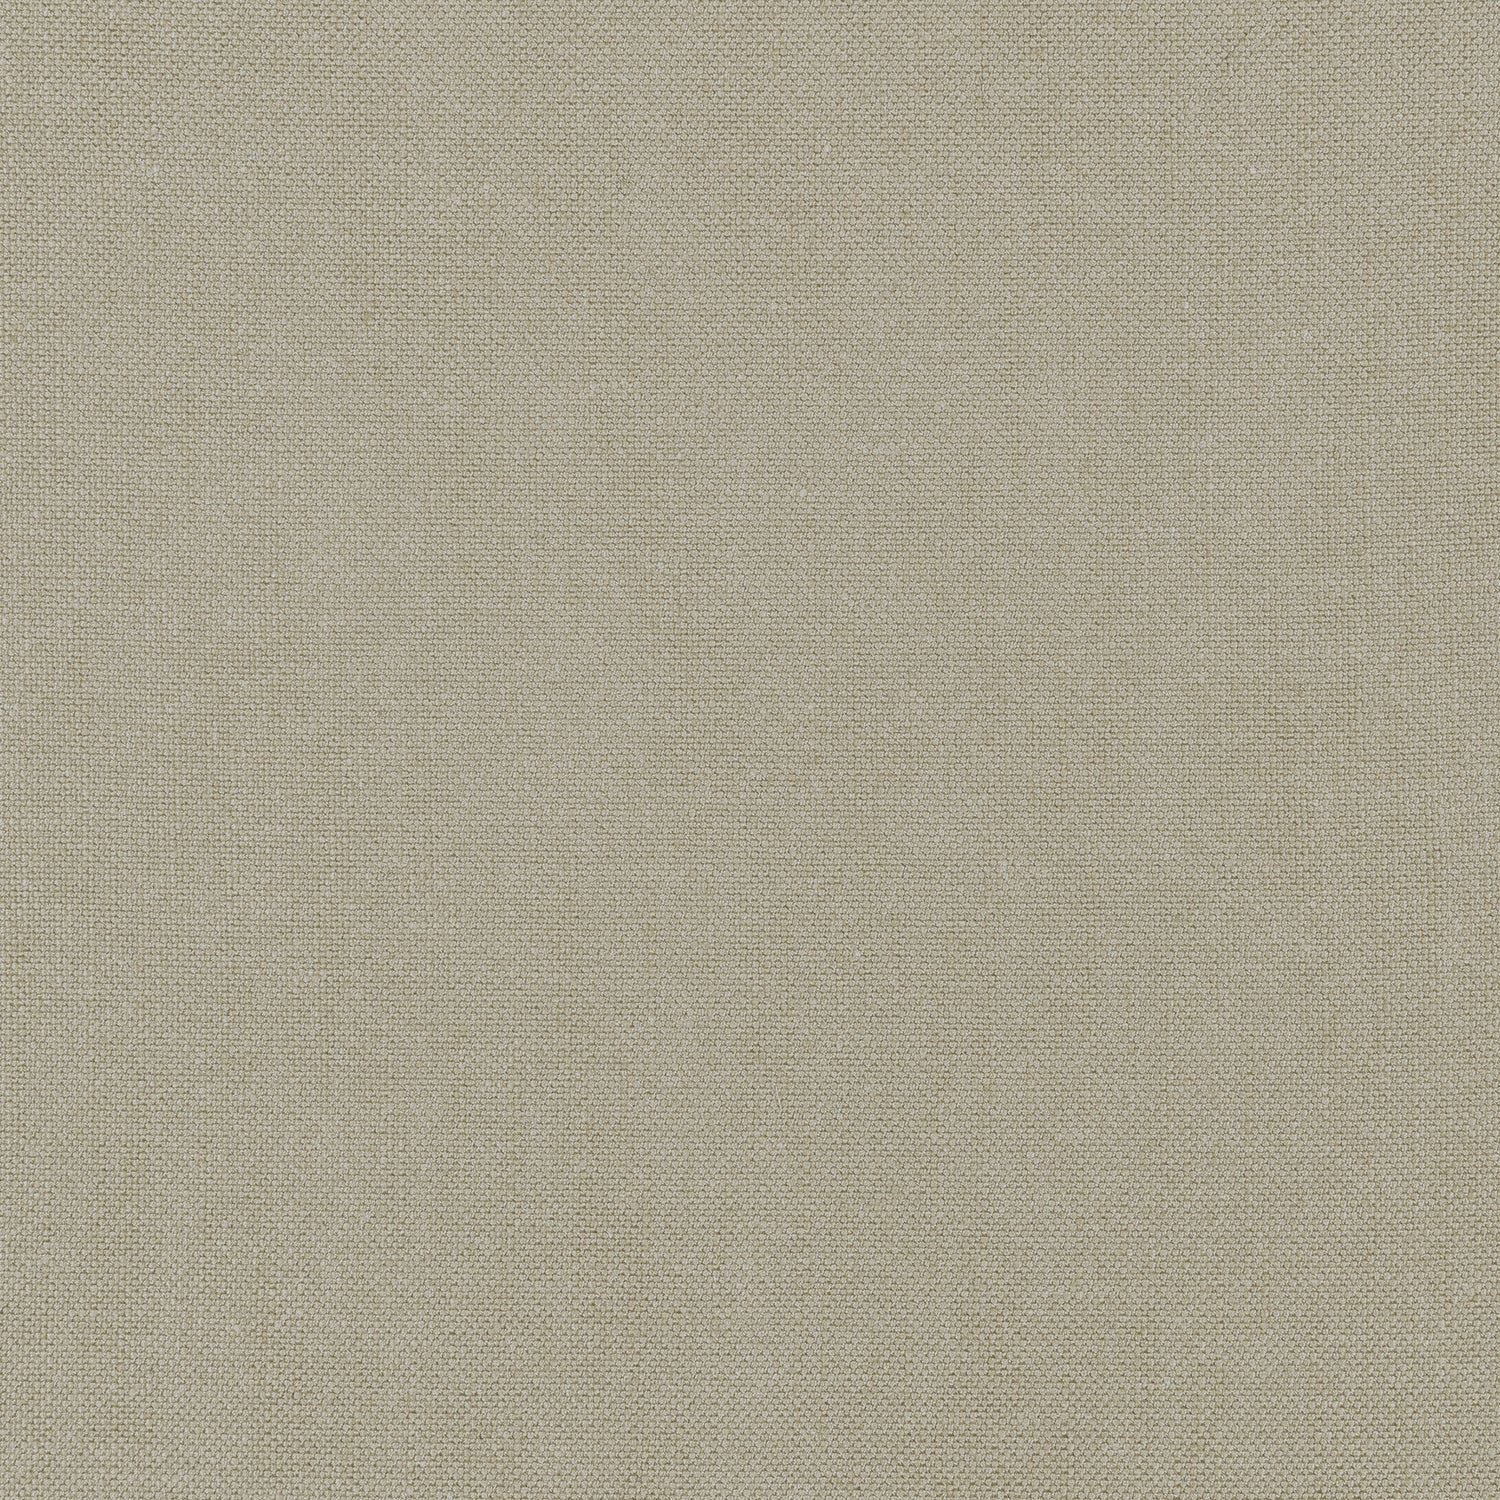 Palisade Linen fabric in mink color - pattern number FWW7663 - by Thibaut in the Palisades collection